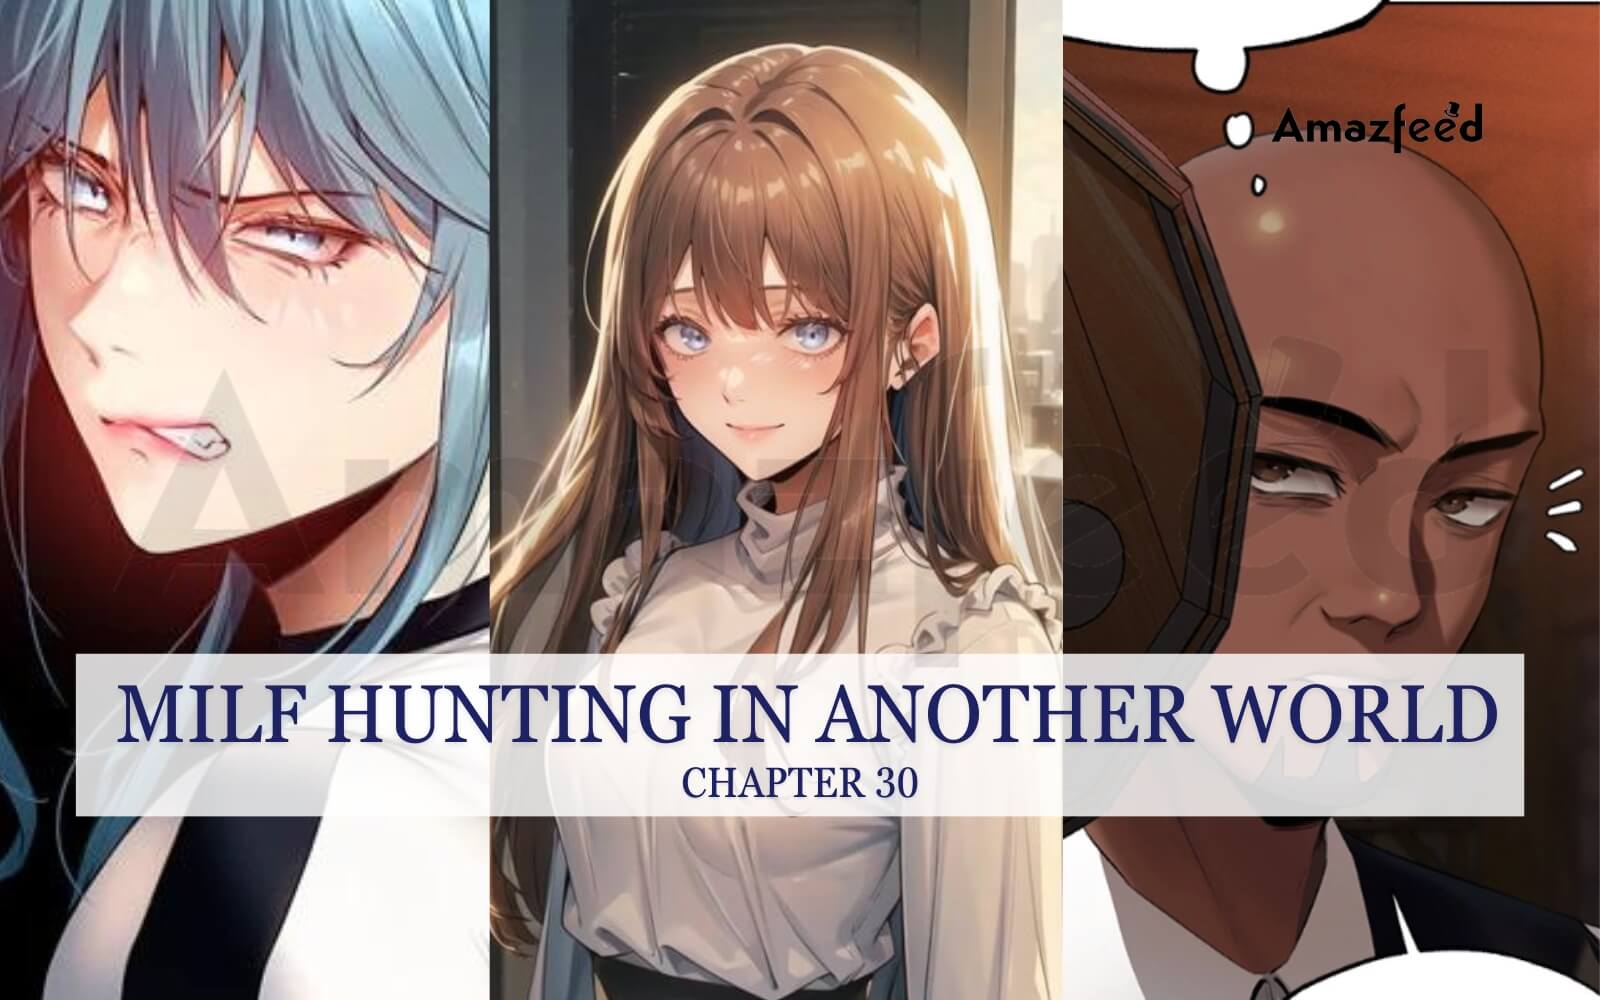 Milf hunting in another world chapter 30